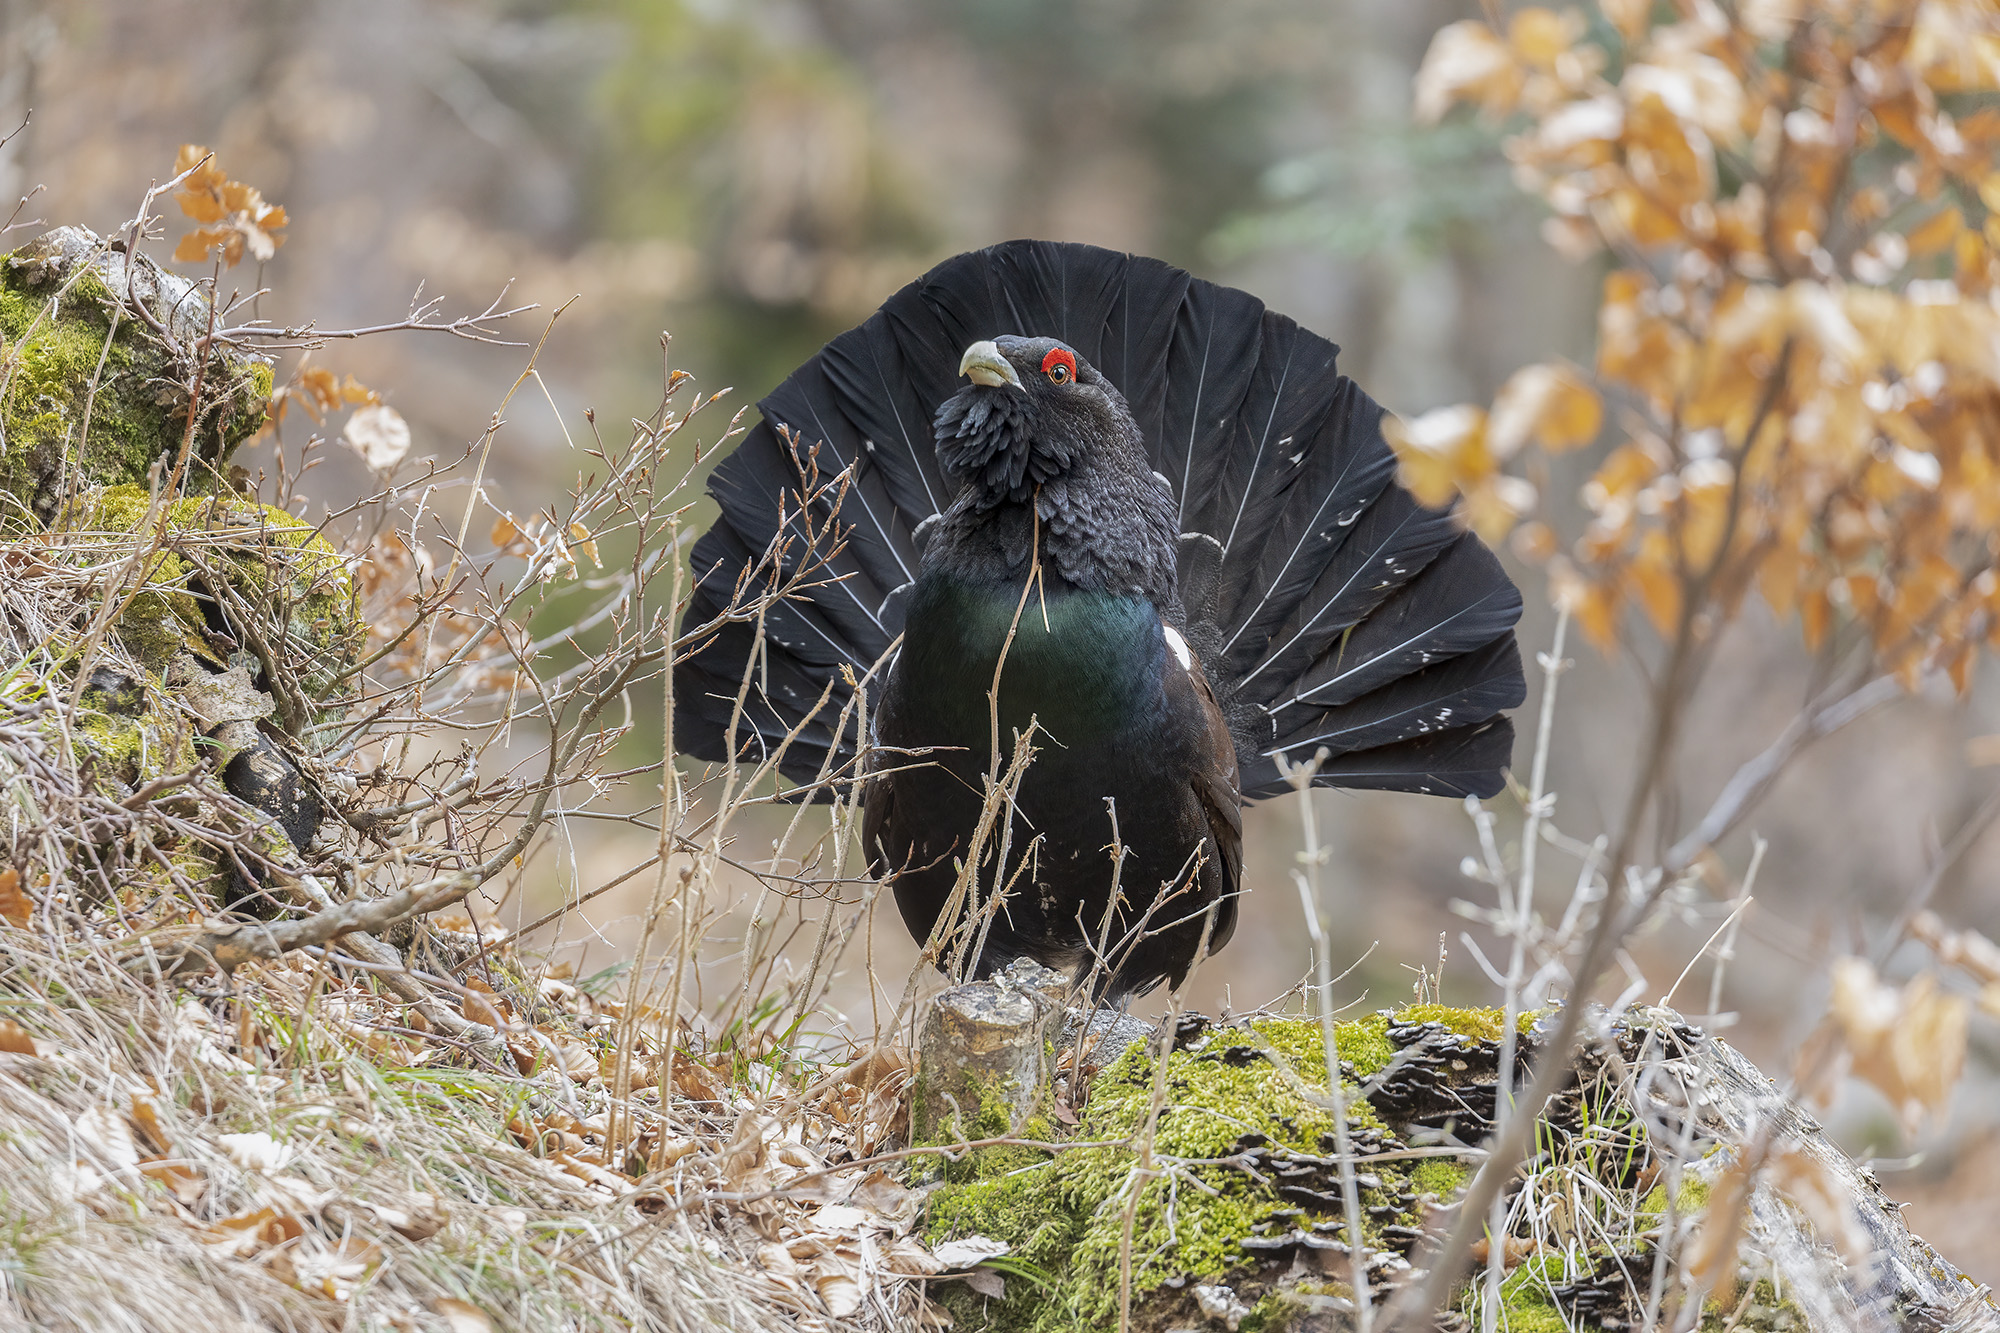 when the capercaillie comes out...